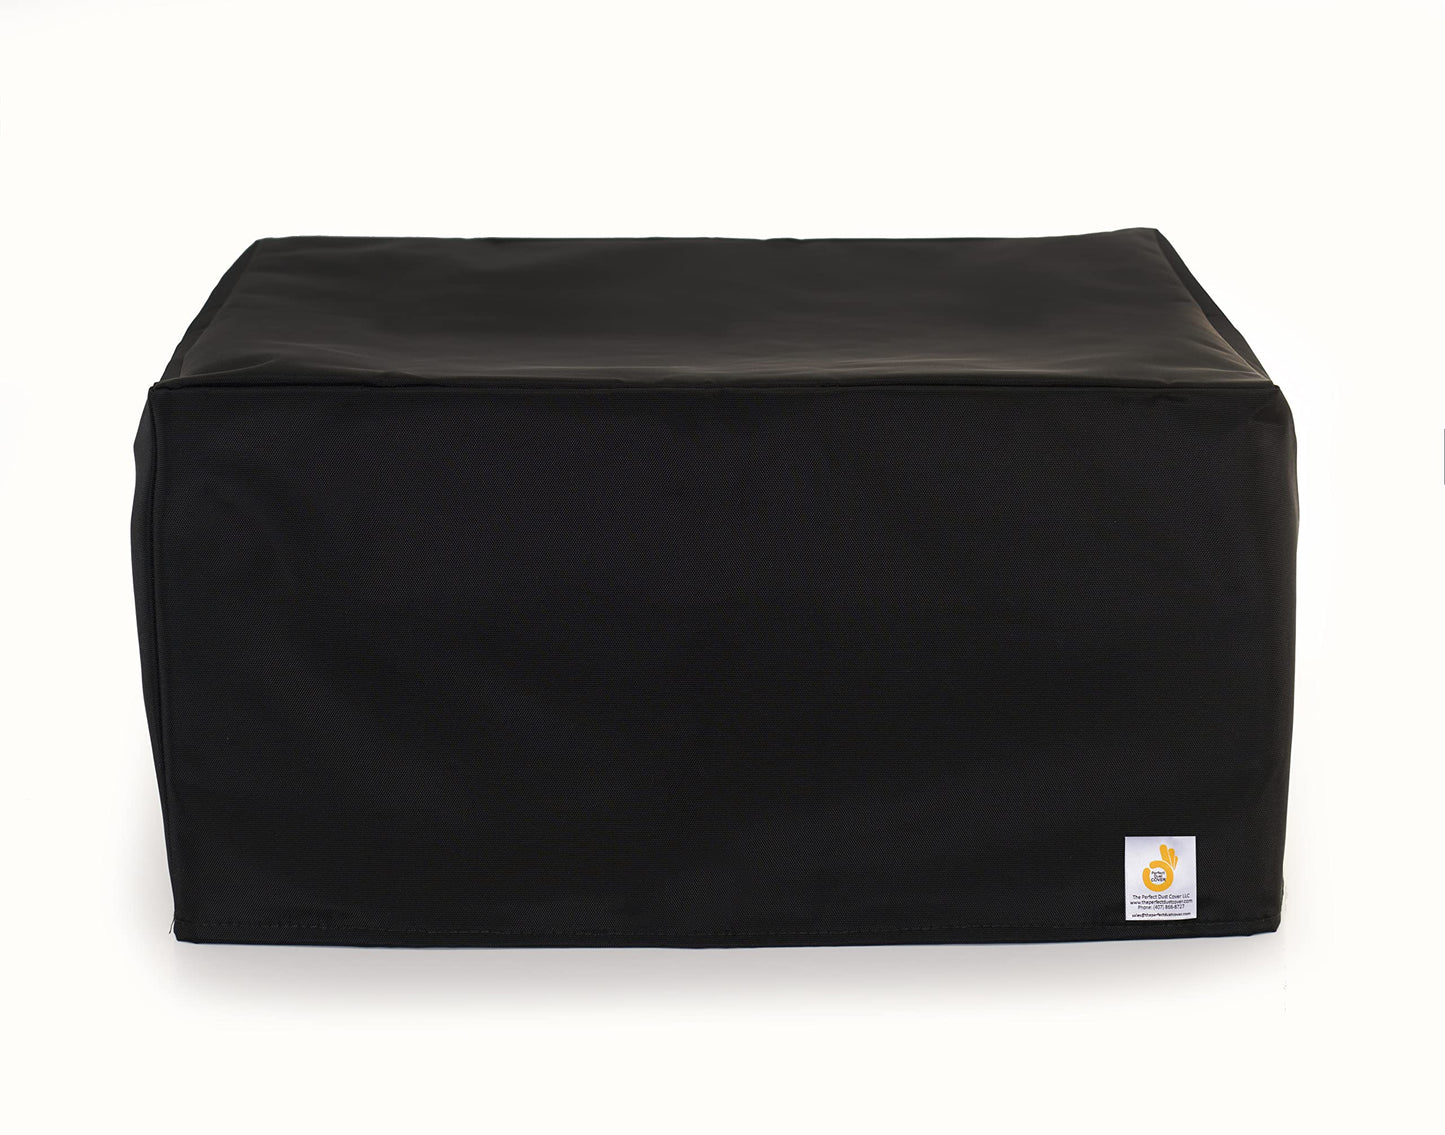 The Perfect Dust Cover, Black Nylon Cover Compatible with Brother MFC-L8690CDW Laser Printer, Anti Static and Double Stitched Cover, Dimensions 17.2''W x 20.1''D x 21''H by The Perfect Dust Cover LLC